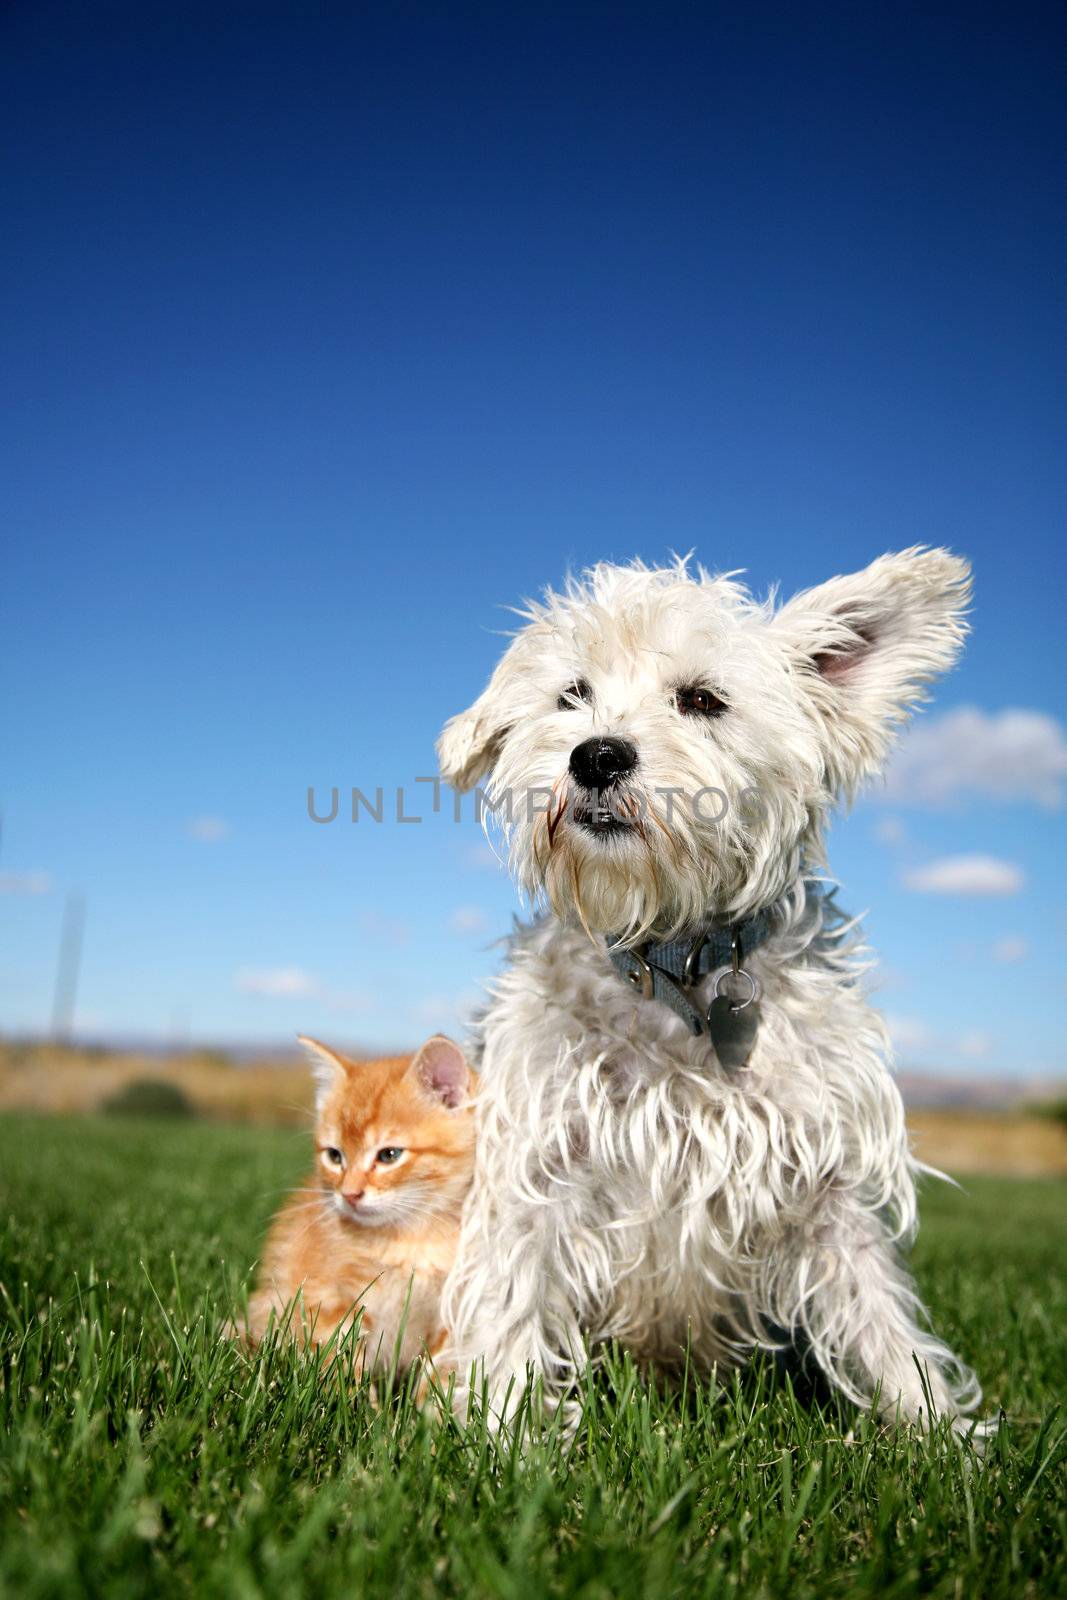 A six week old kitten and a white terrier on lawn
